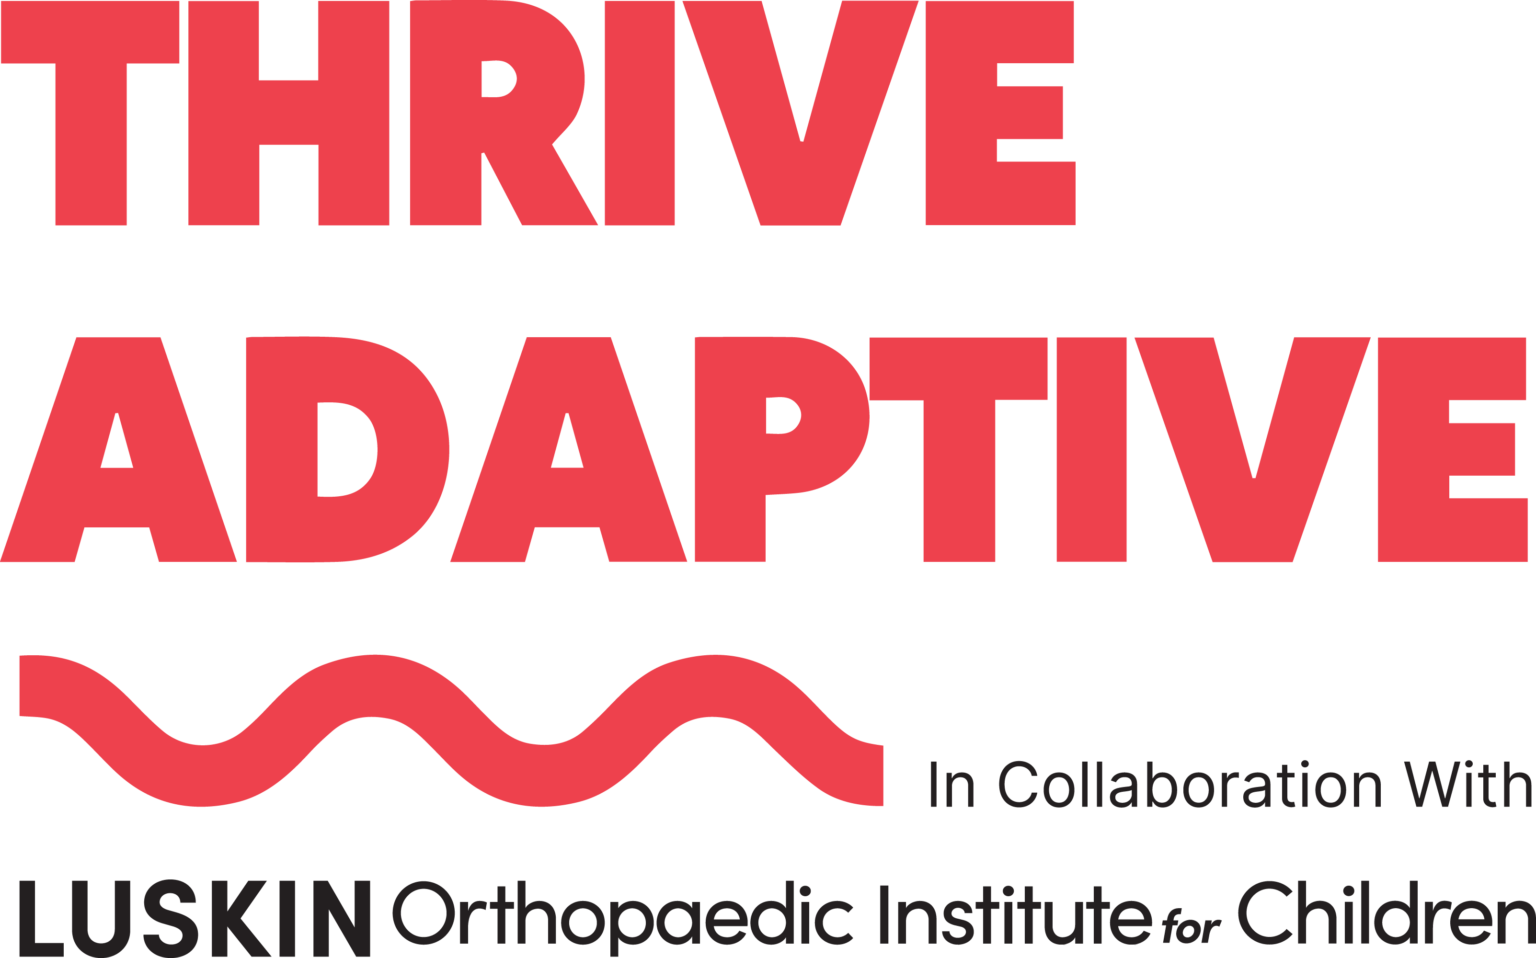 Thrive_Adaptive_Updated_Logo-2-1536x958.png